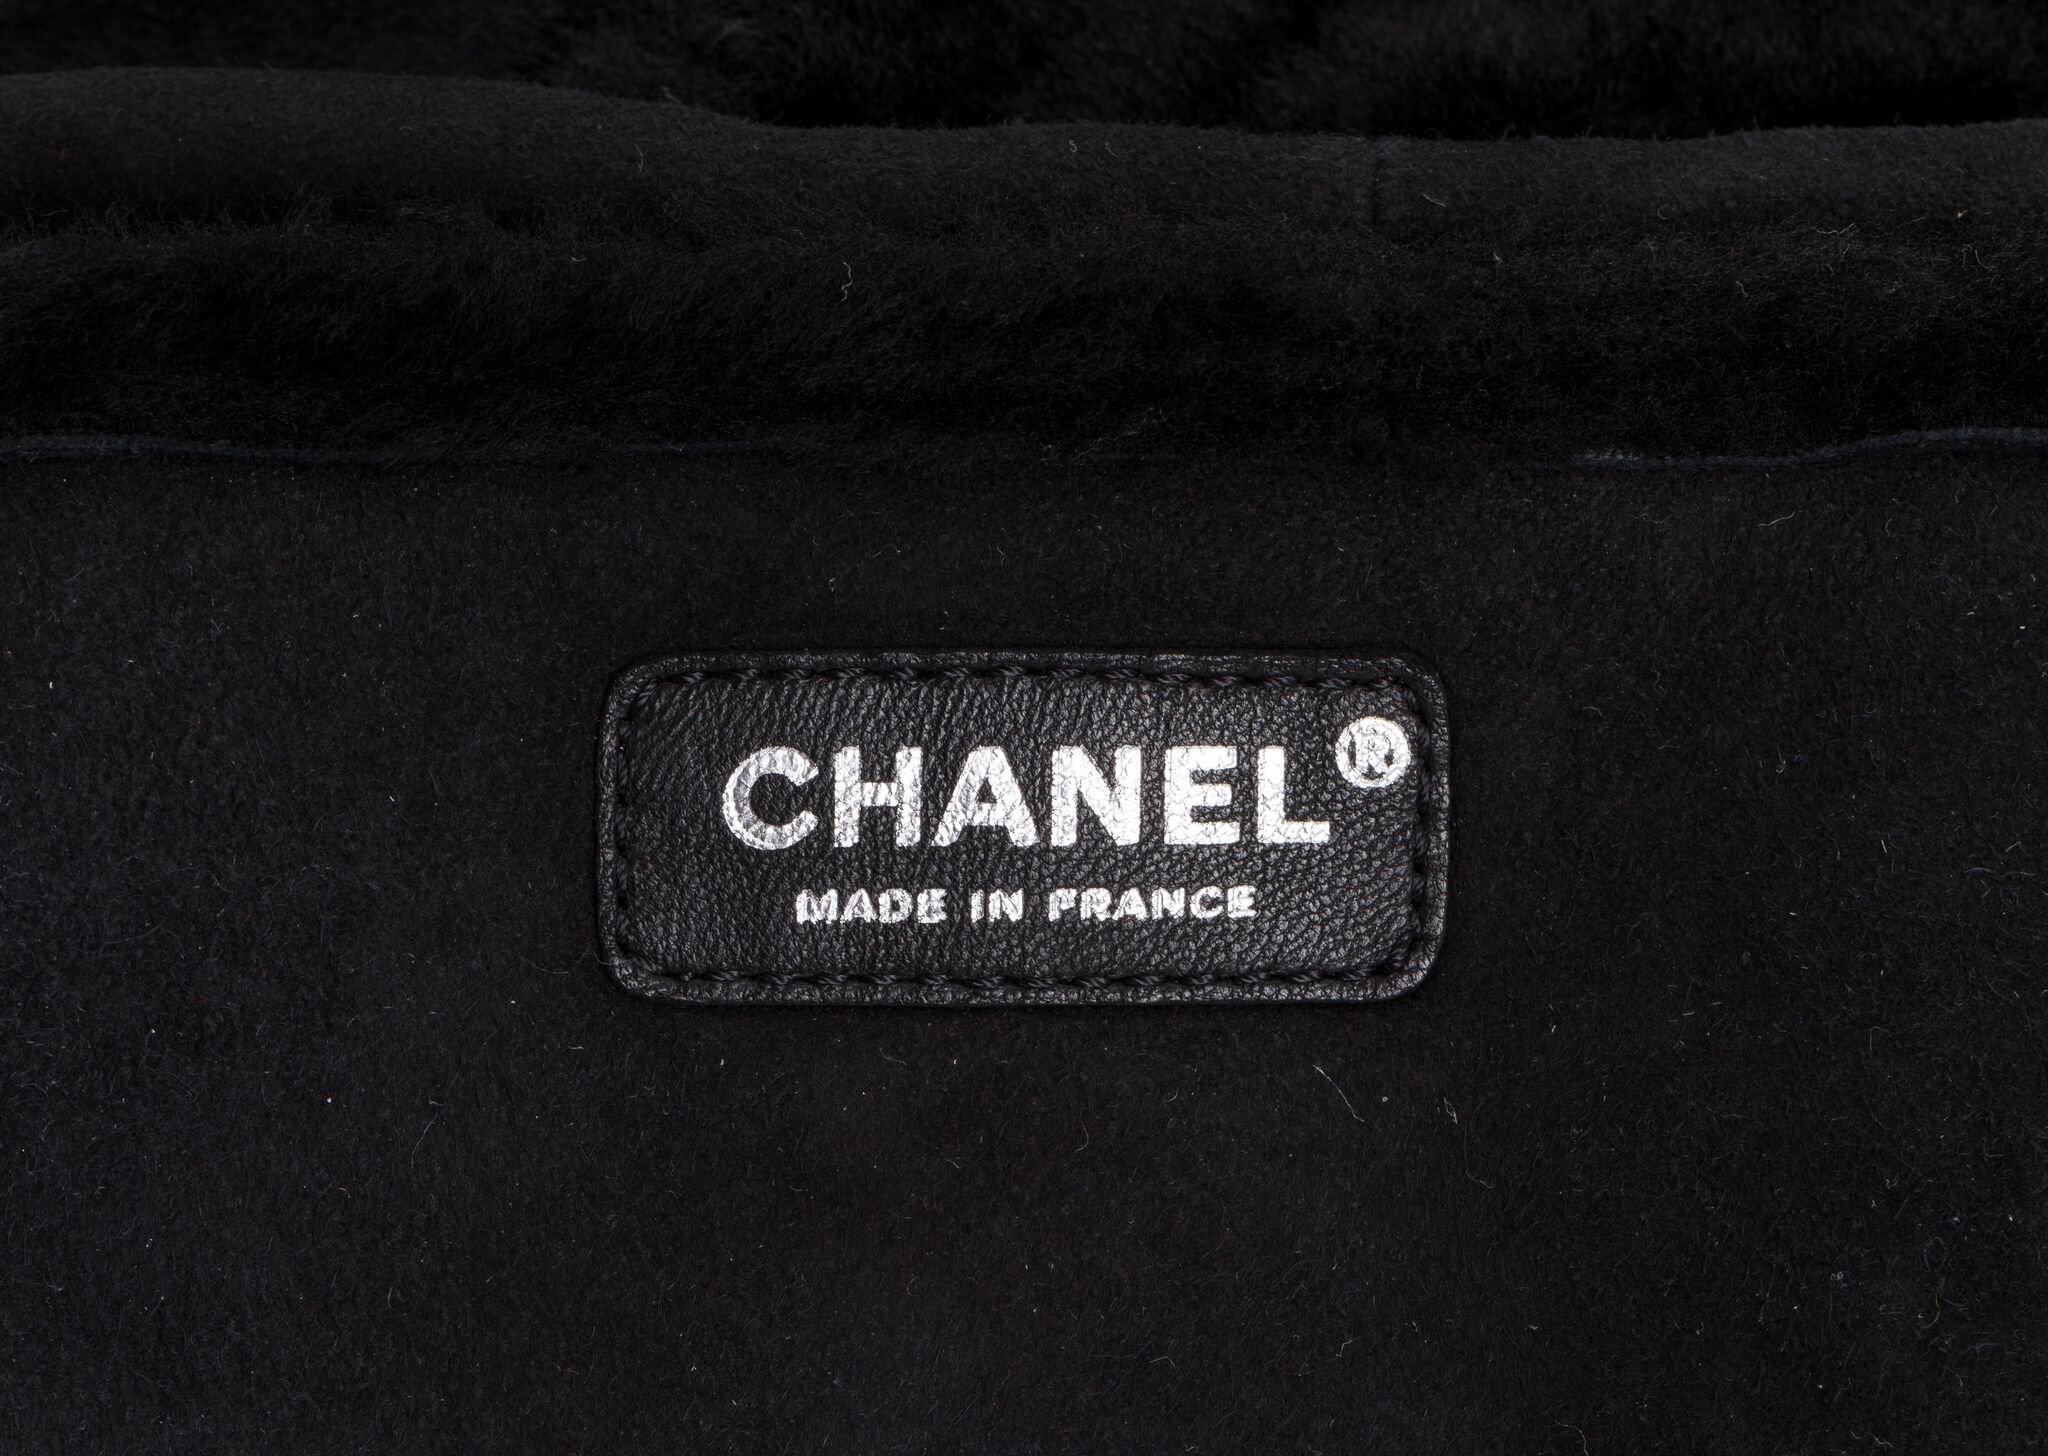 Chanel Coco Neige Flap Bag Quilted Suede with Shearling Large